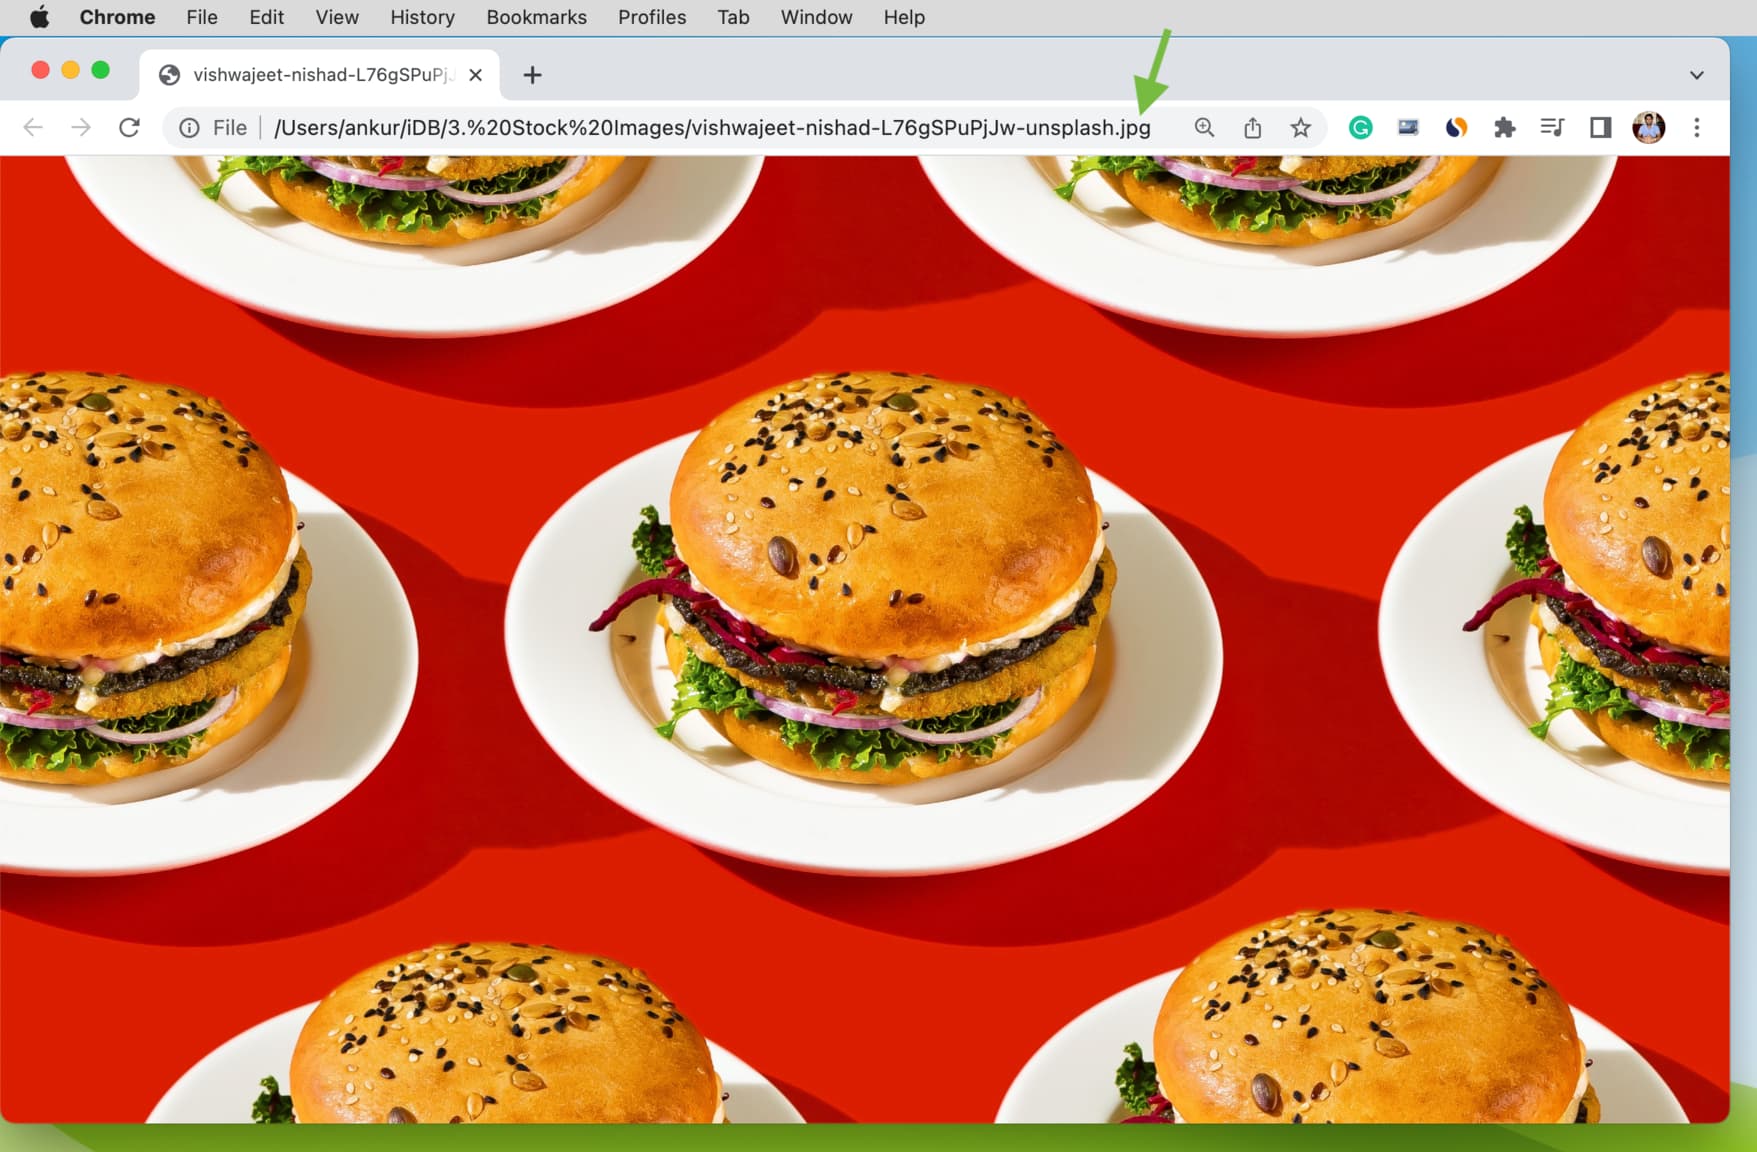 Opening an image in Chrome on Mac